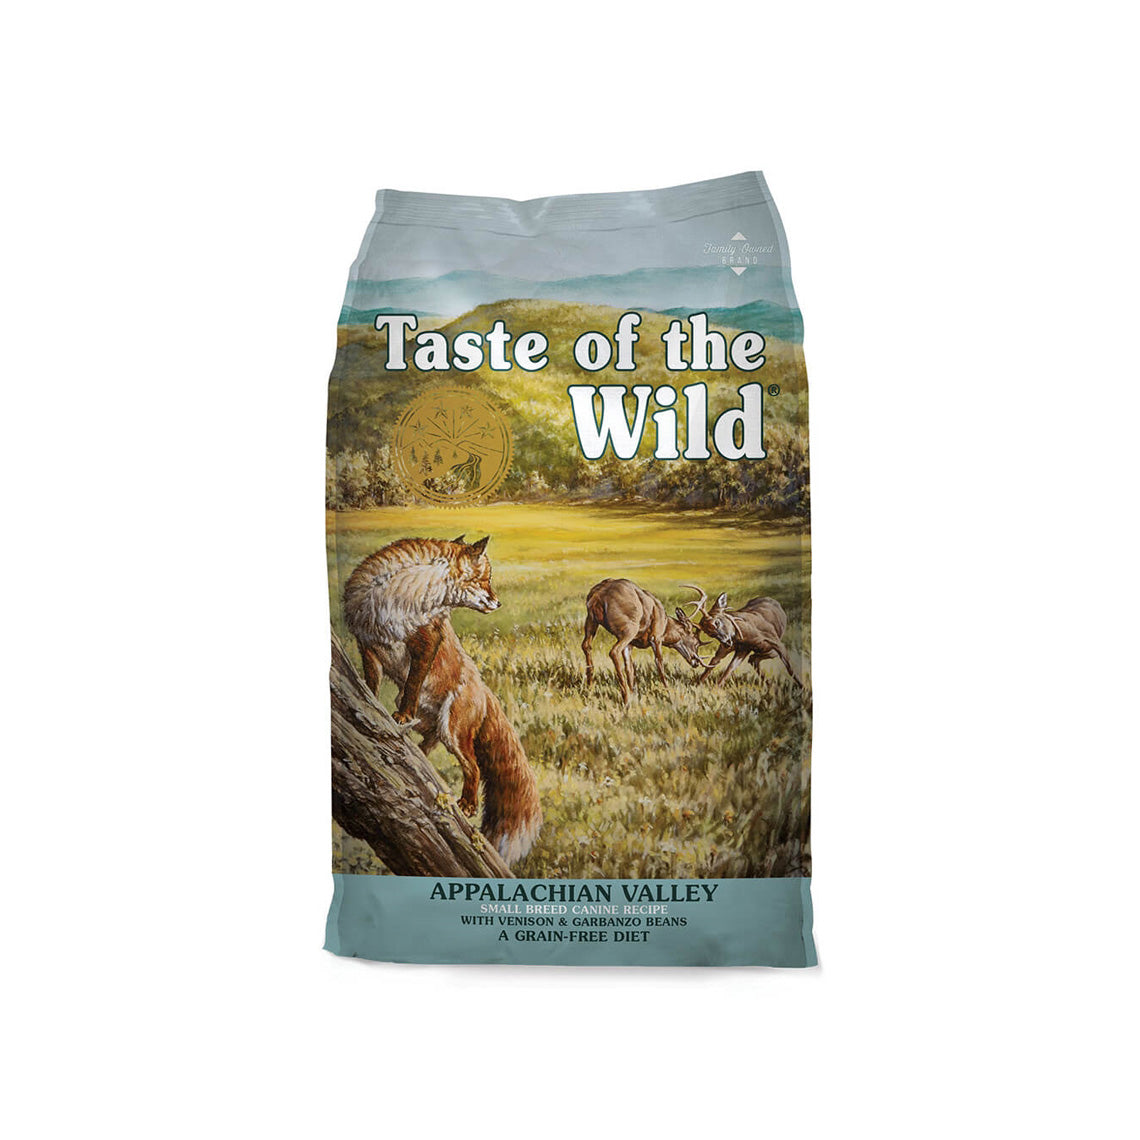 taste of the wild dog food sold near me